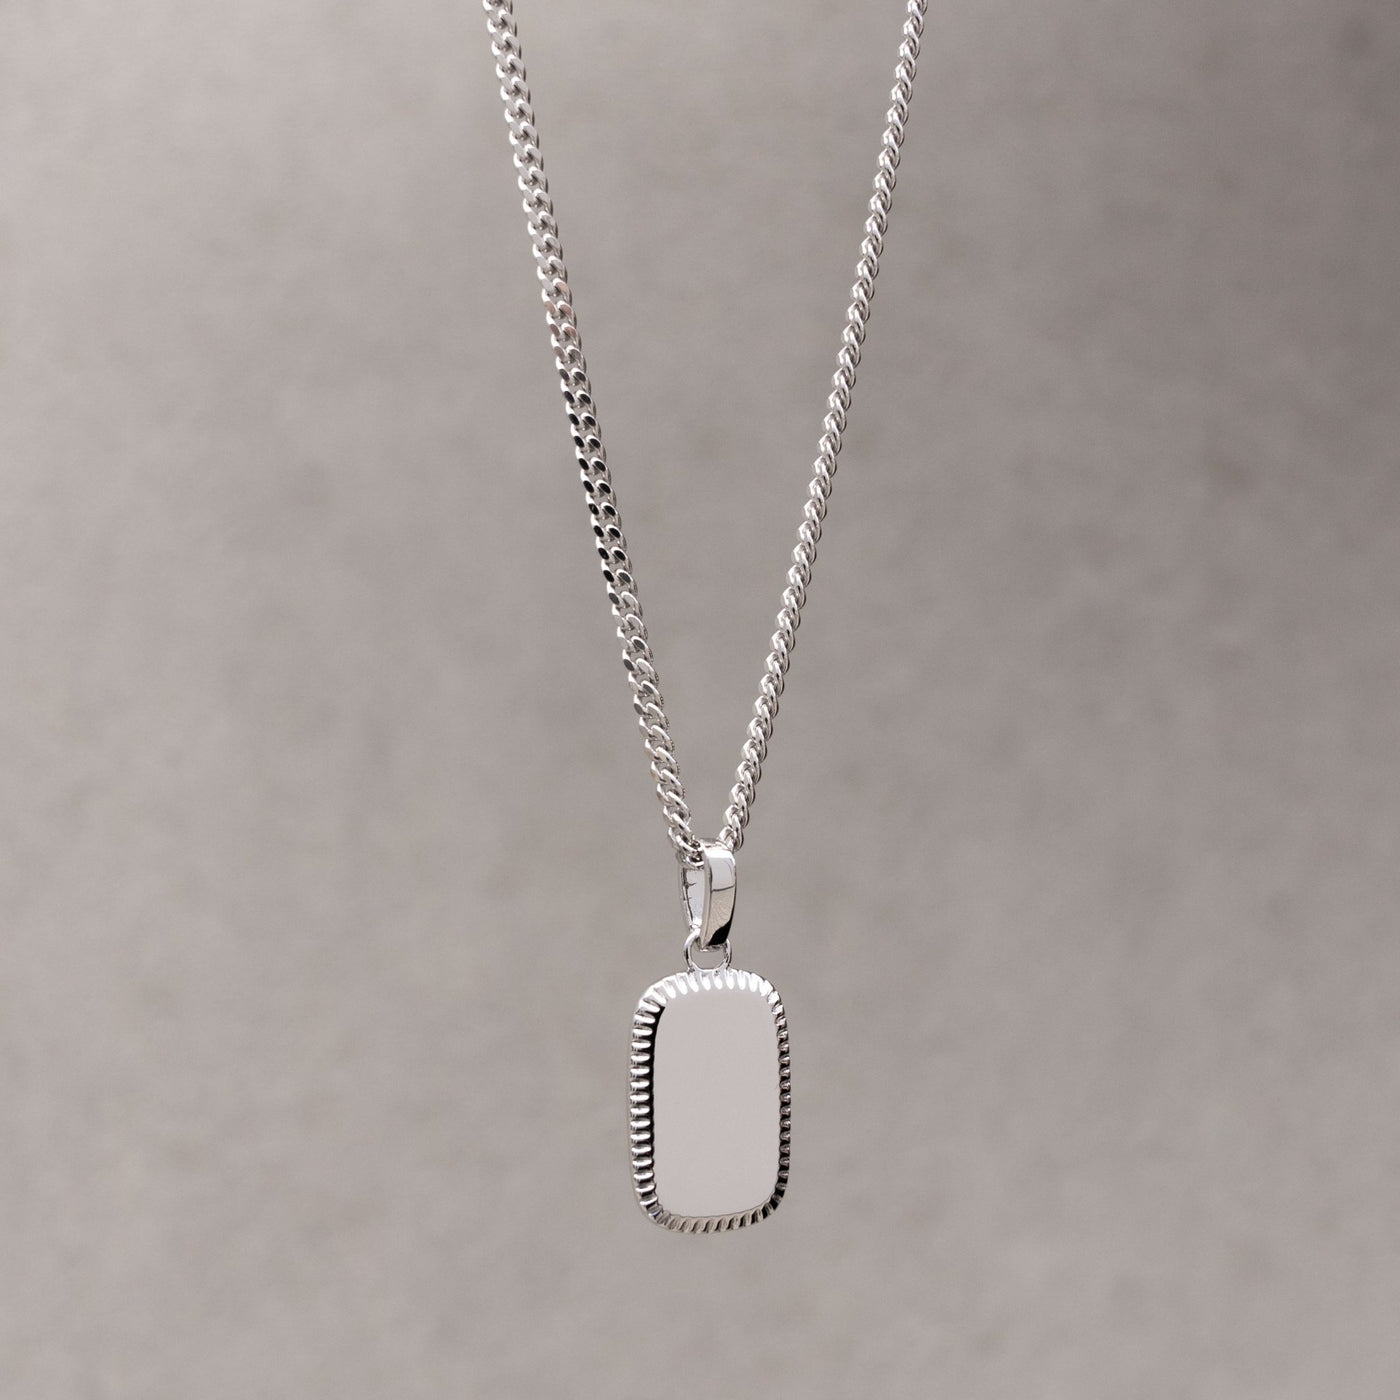 ENGRAVING PLATE NECKLACE 925 SILVER RHODIUM PLATED - IDENTIM®